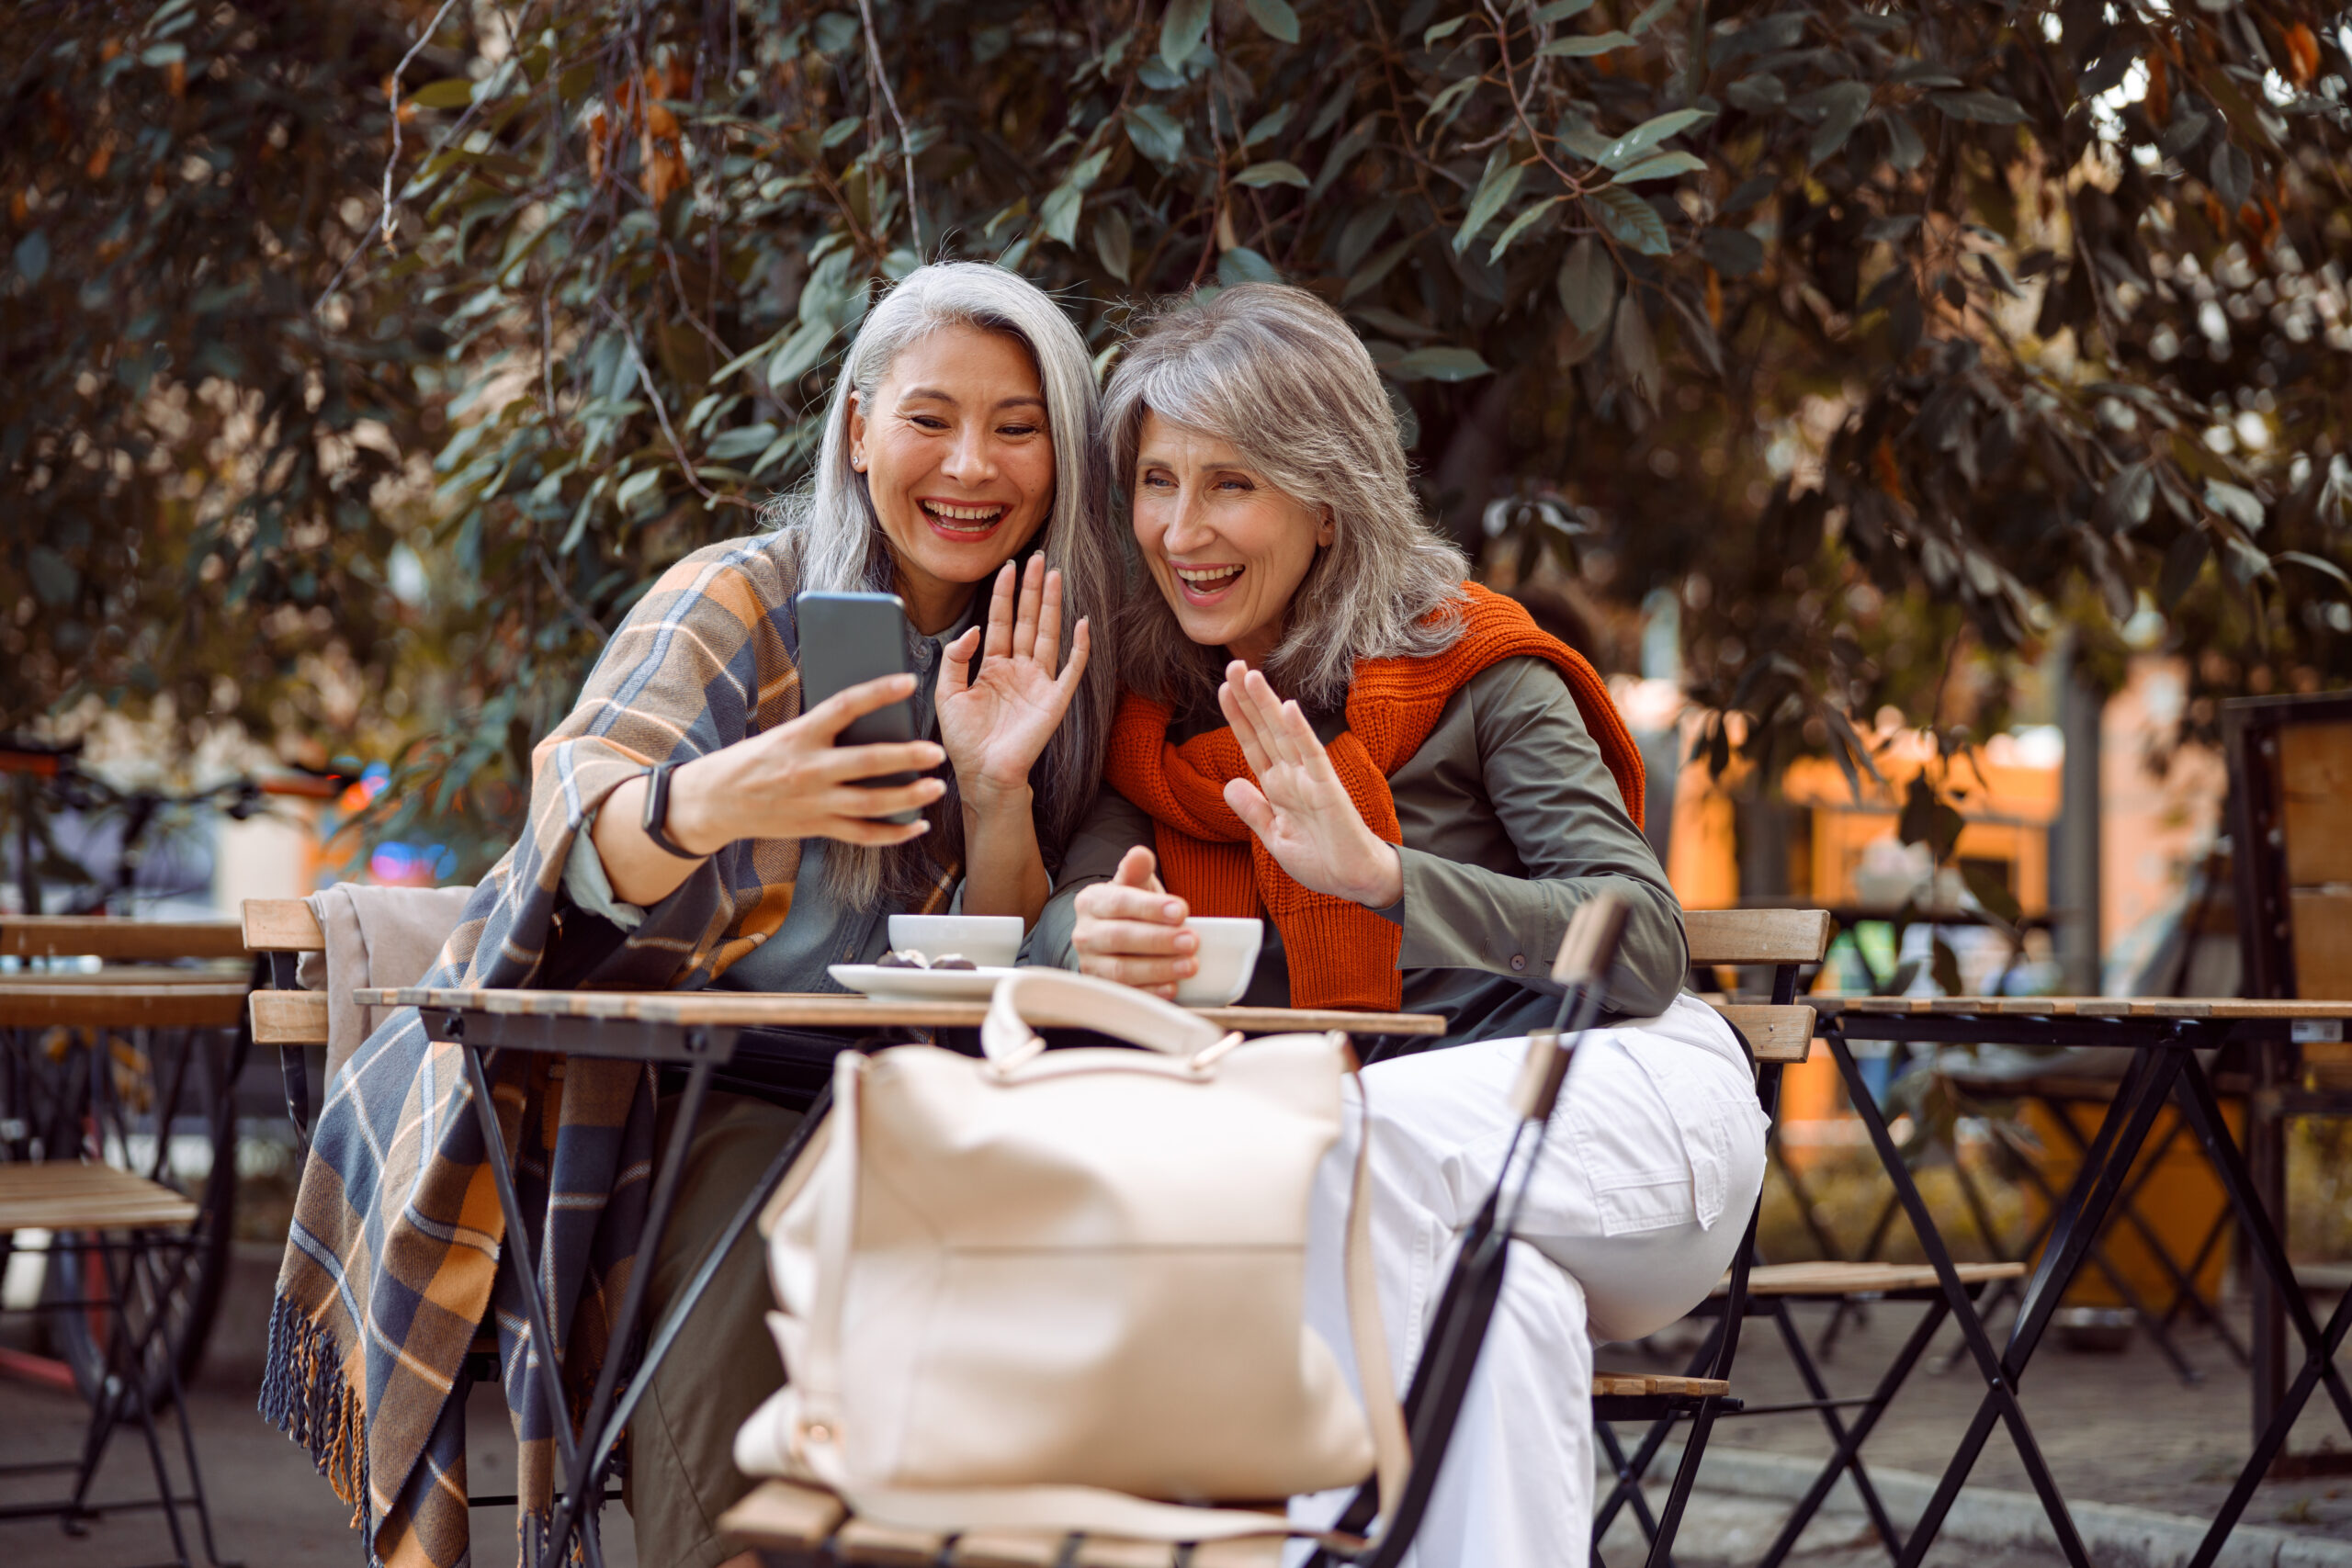 Senior women having tea and getting a selfie at an outdoor coffee shop